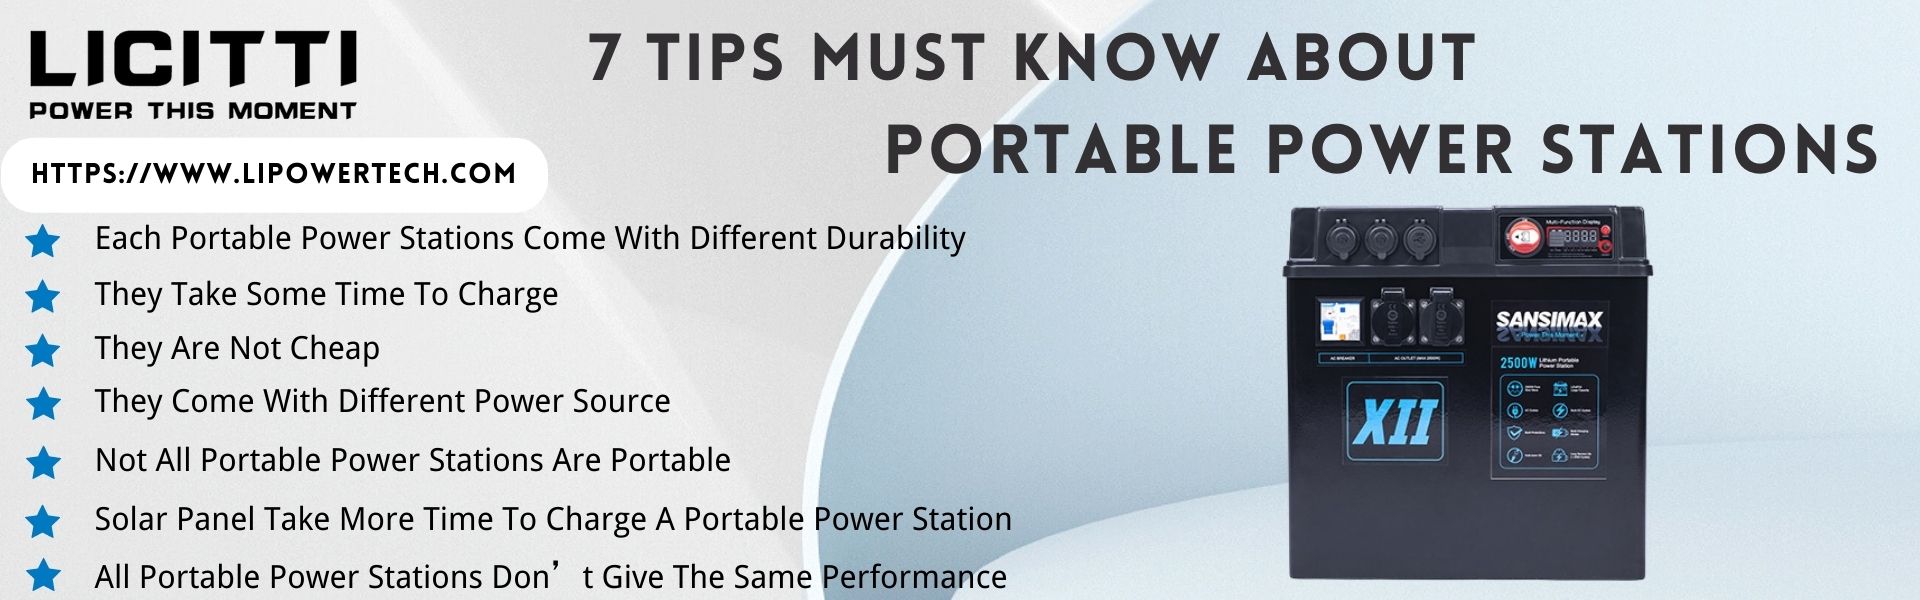 7-tips-must-know-about-portable-power-stations